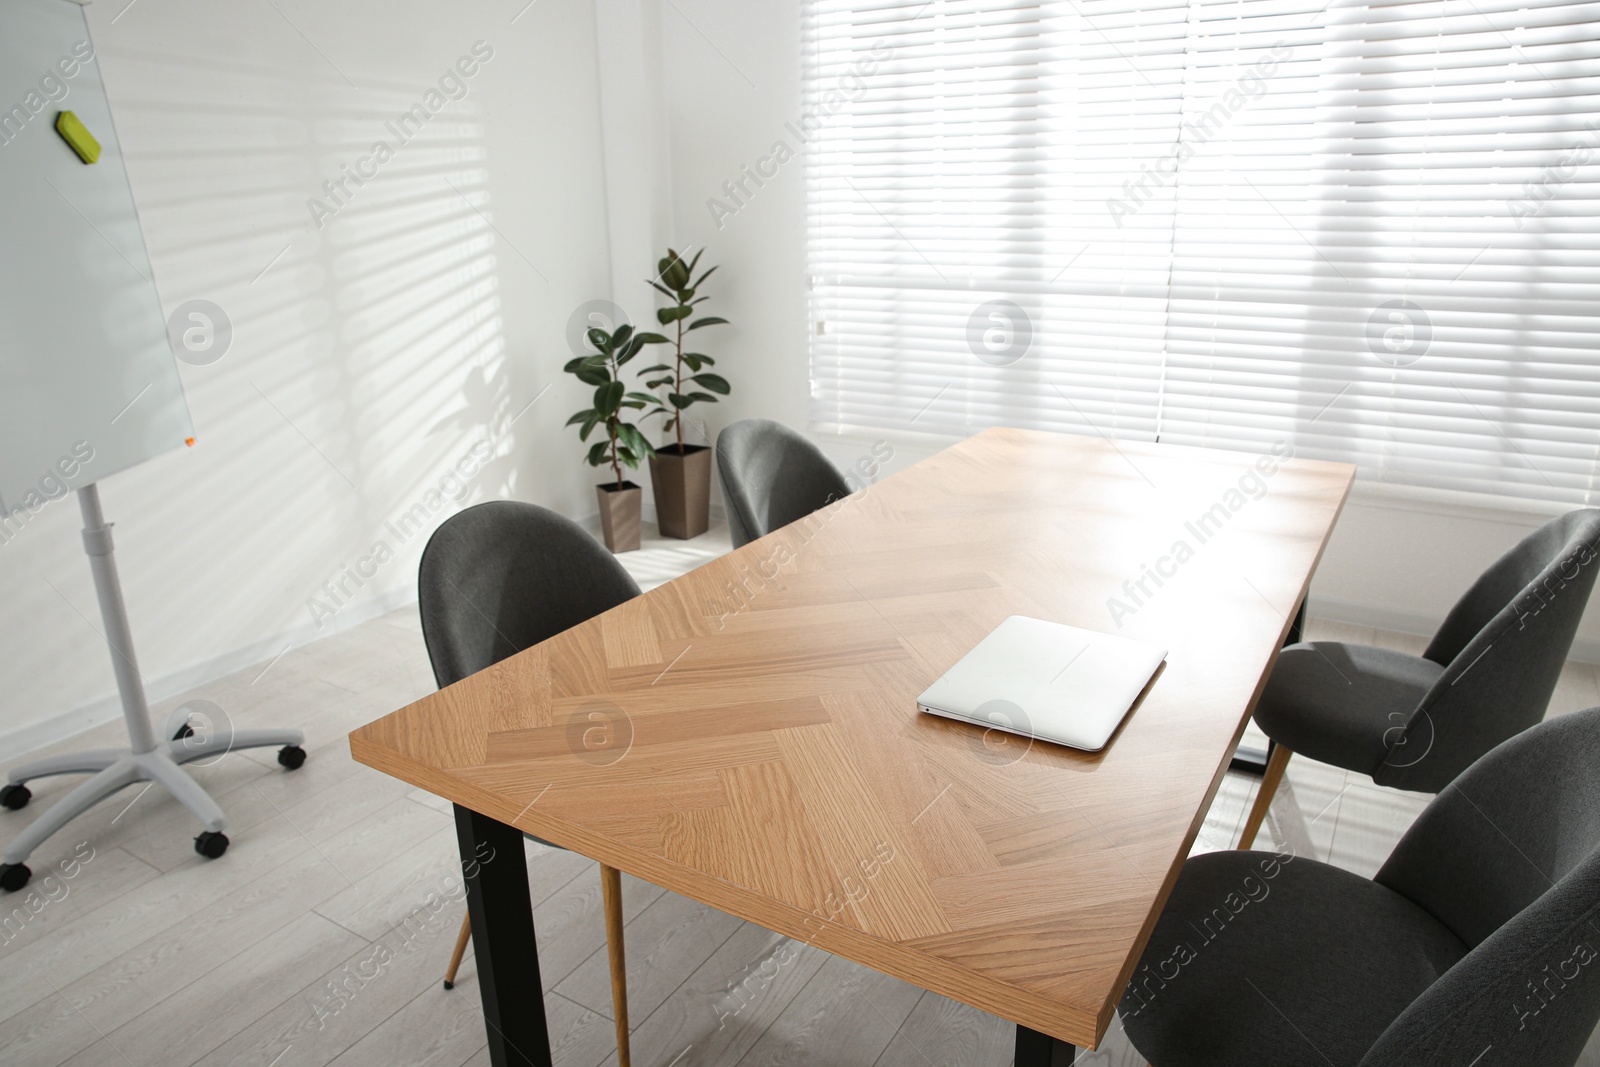 Photo of Conference room interior with laptop on wooden table